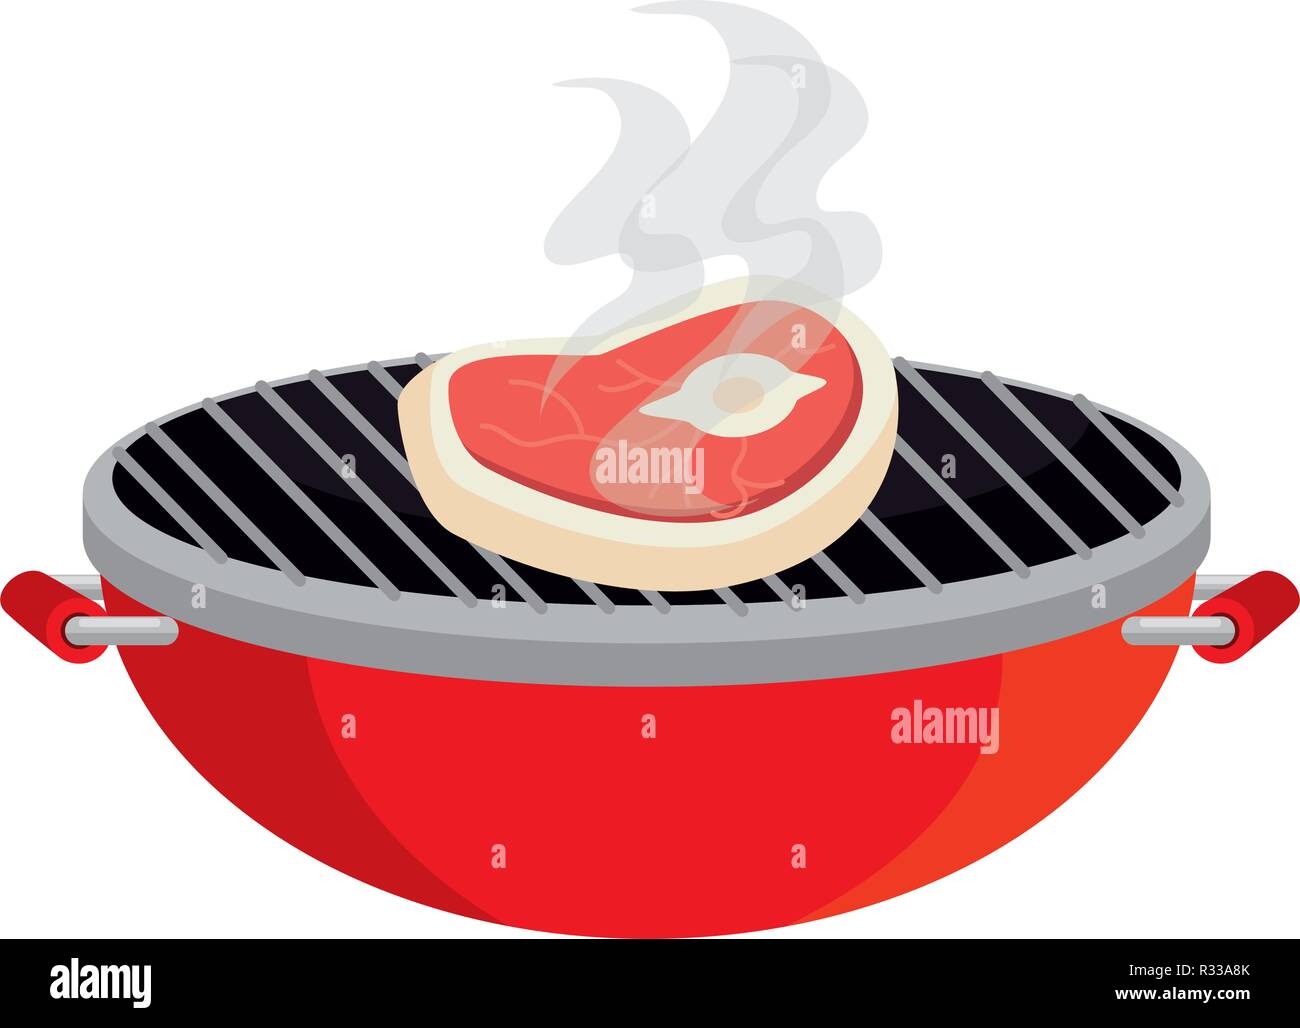 https://c8.alamy.com/comp/R33A8K/bbq-grill-with-meat-beef-vector-illustration-design-R33A8K.jpg